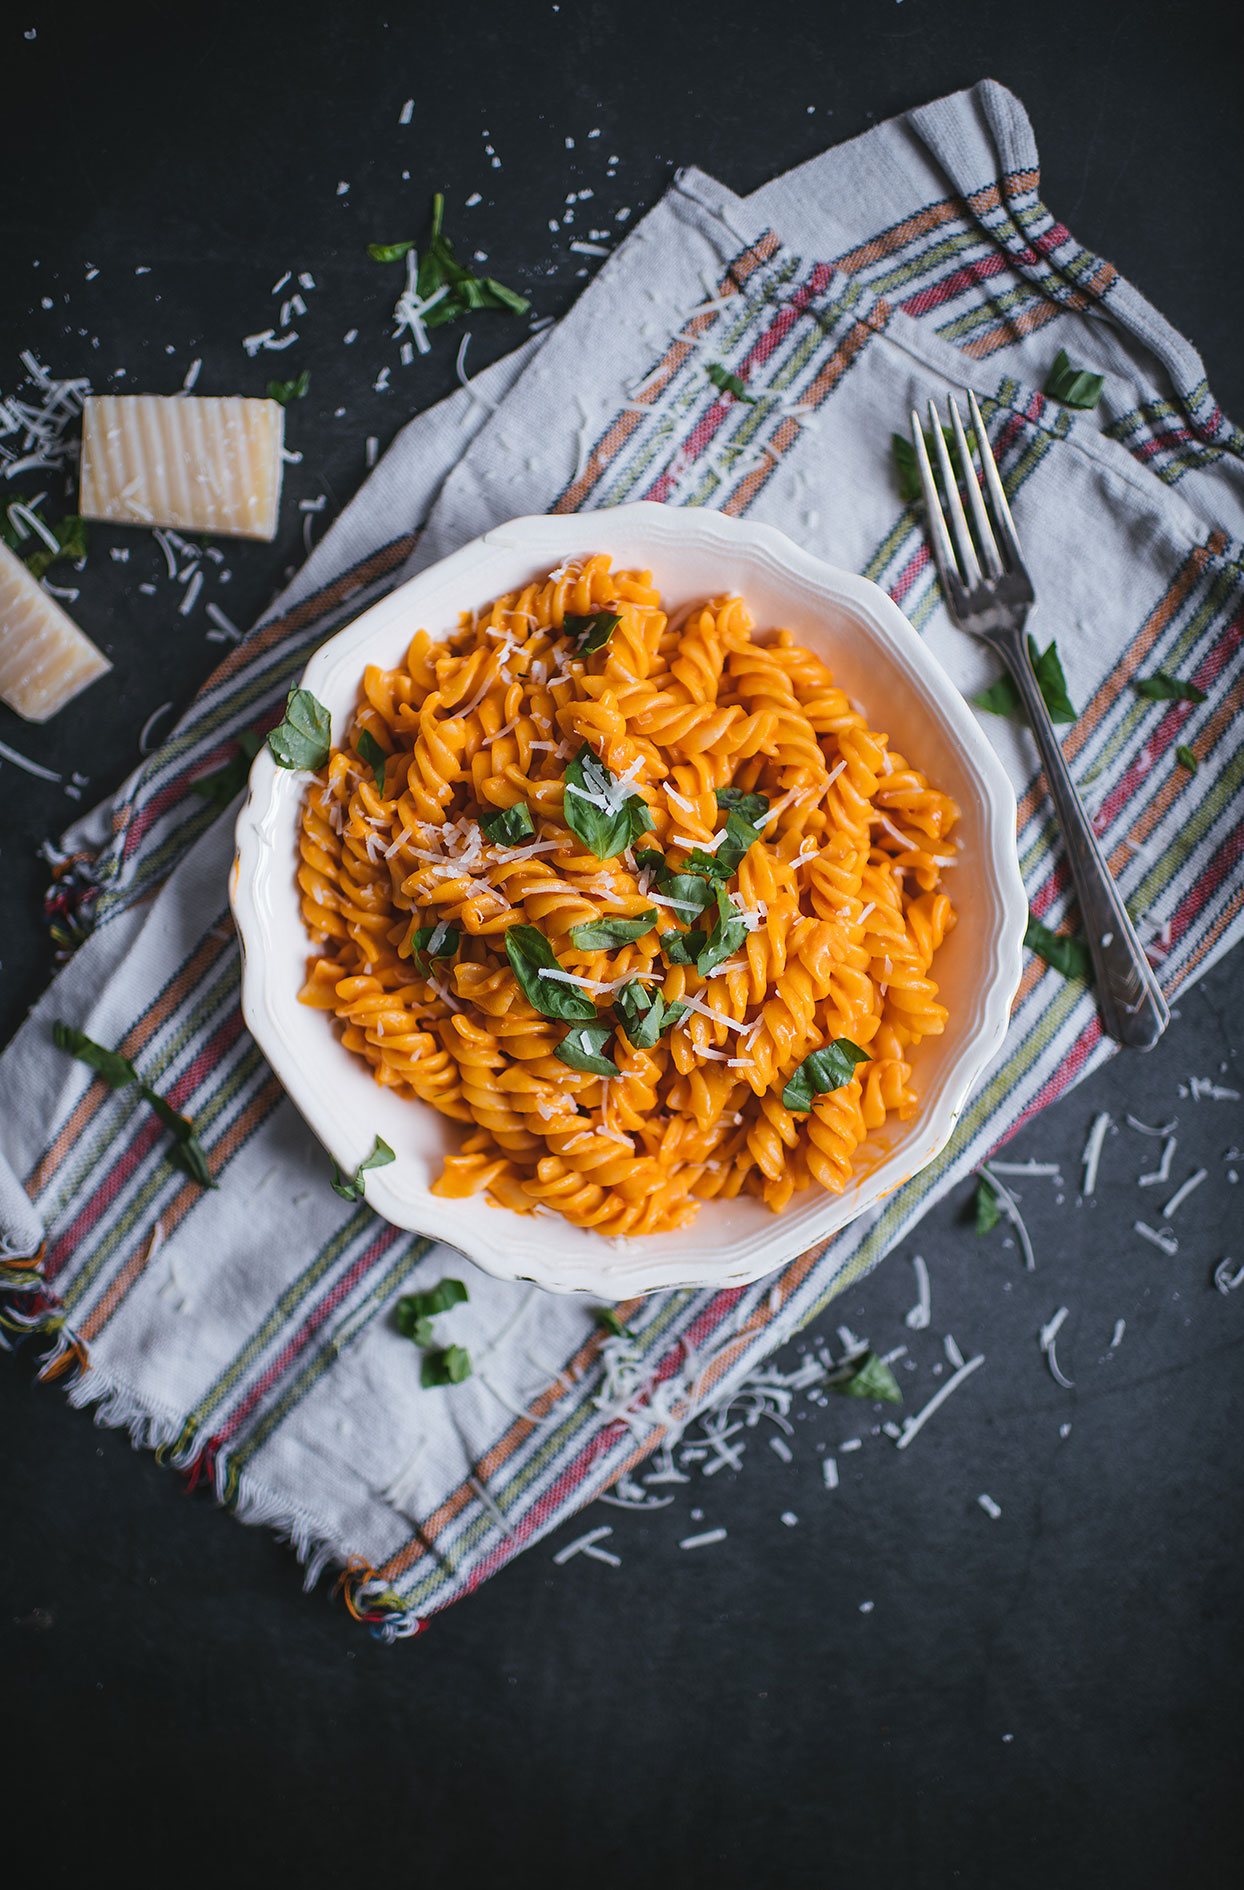 Pasta with tomatoes and vodka (Romanoff)